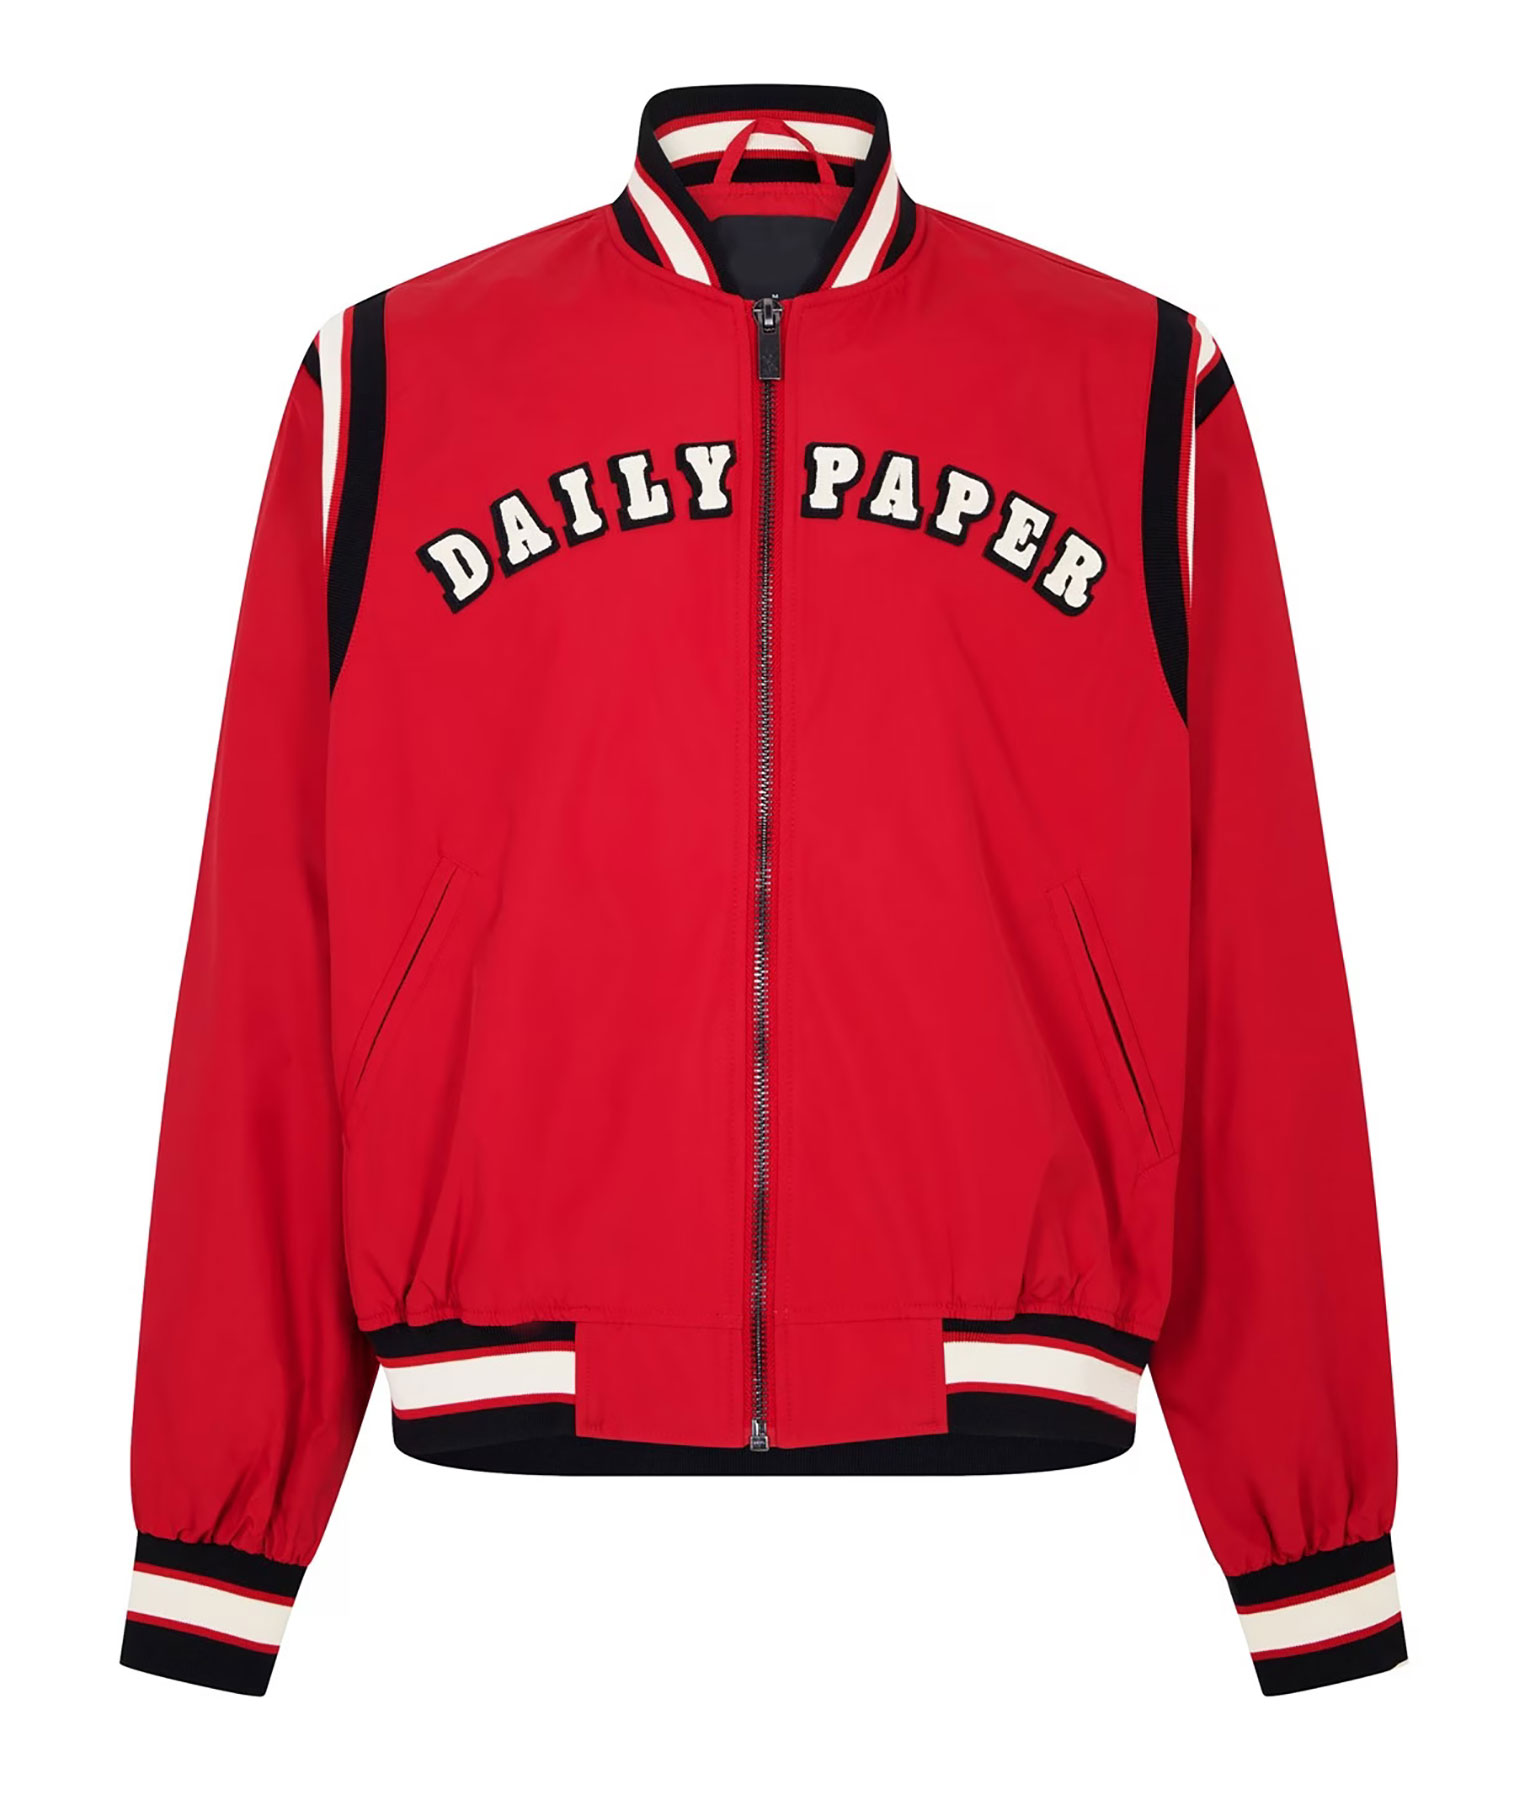 The Voice Chance the Rapper Red Varsity Jacket (3)